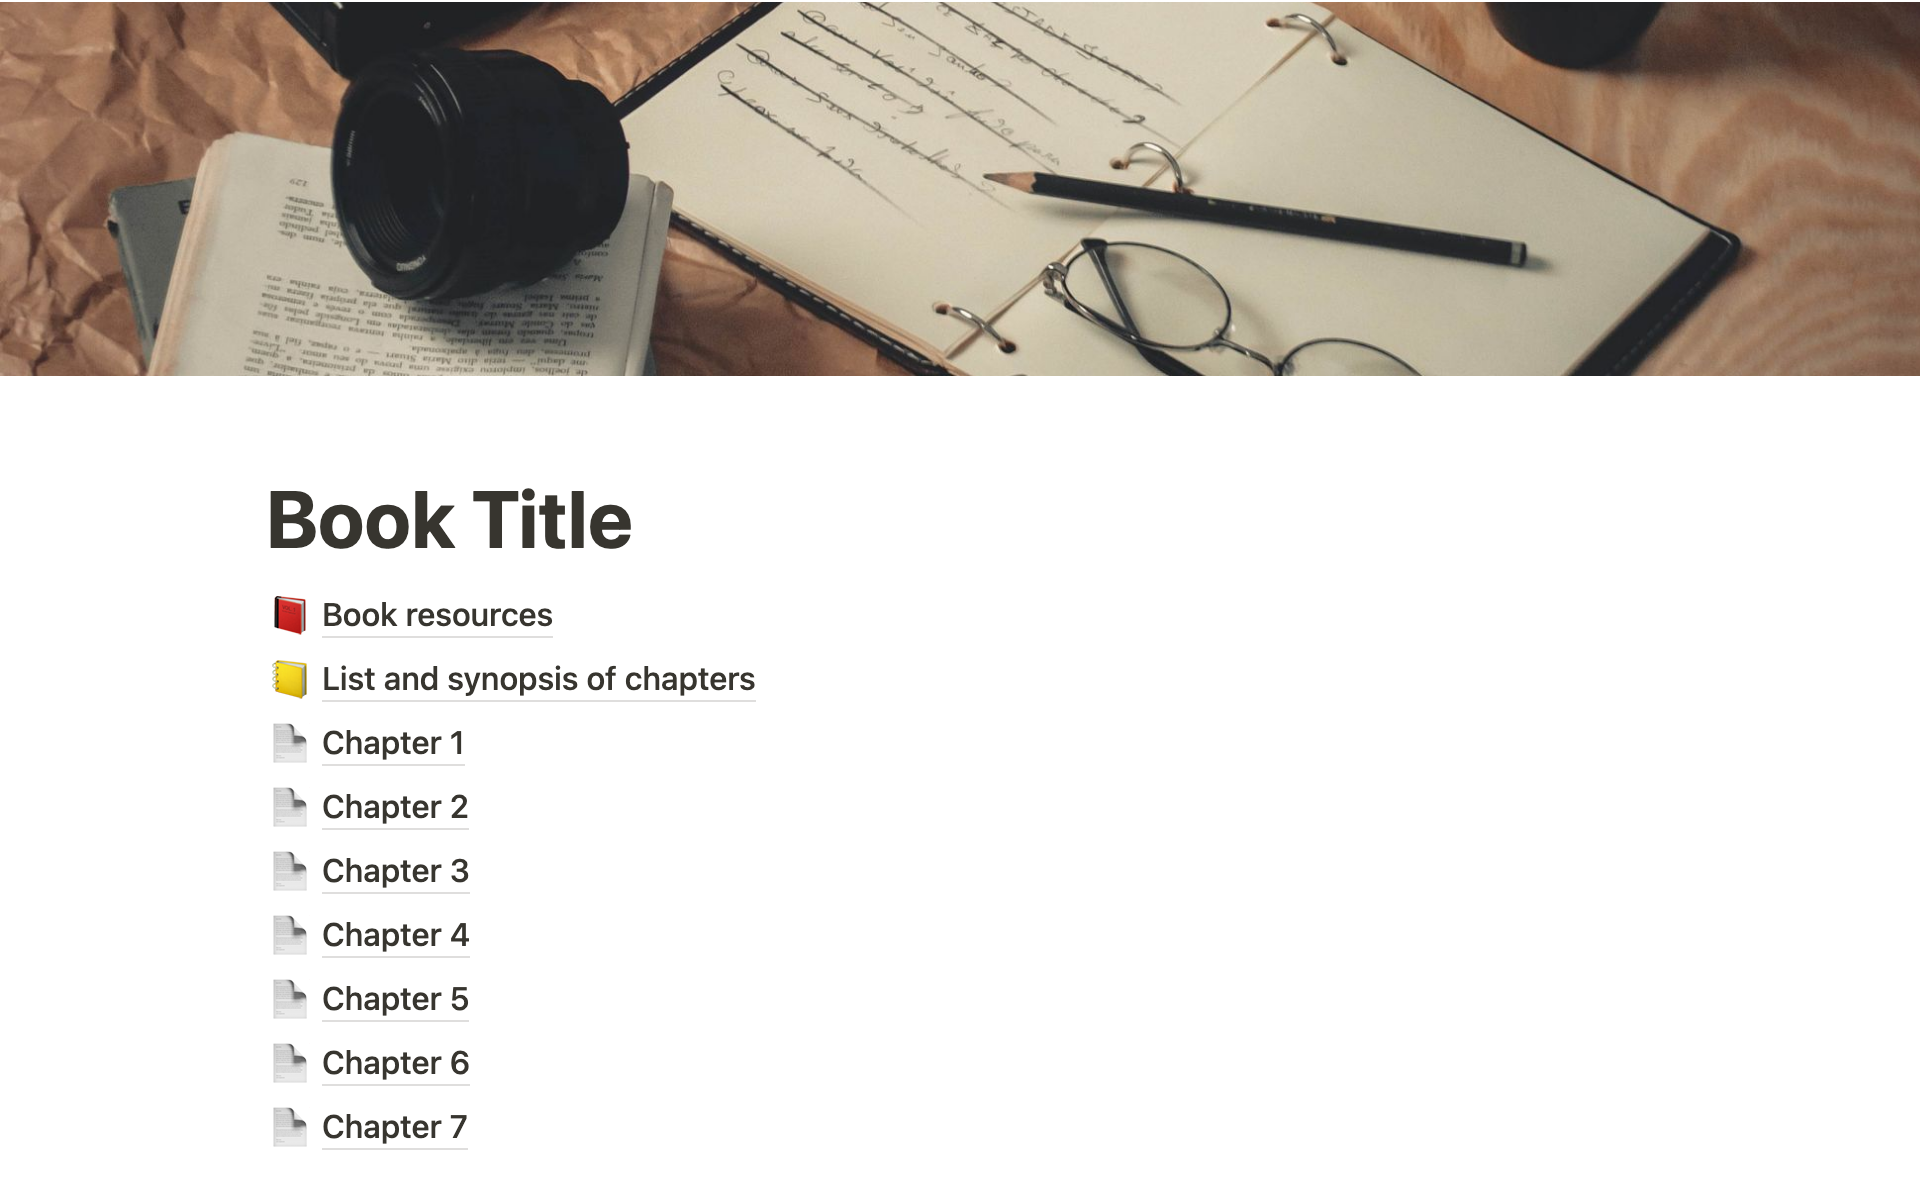 Designed to help writers focus on their stories without any unnecessary distractions.